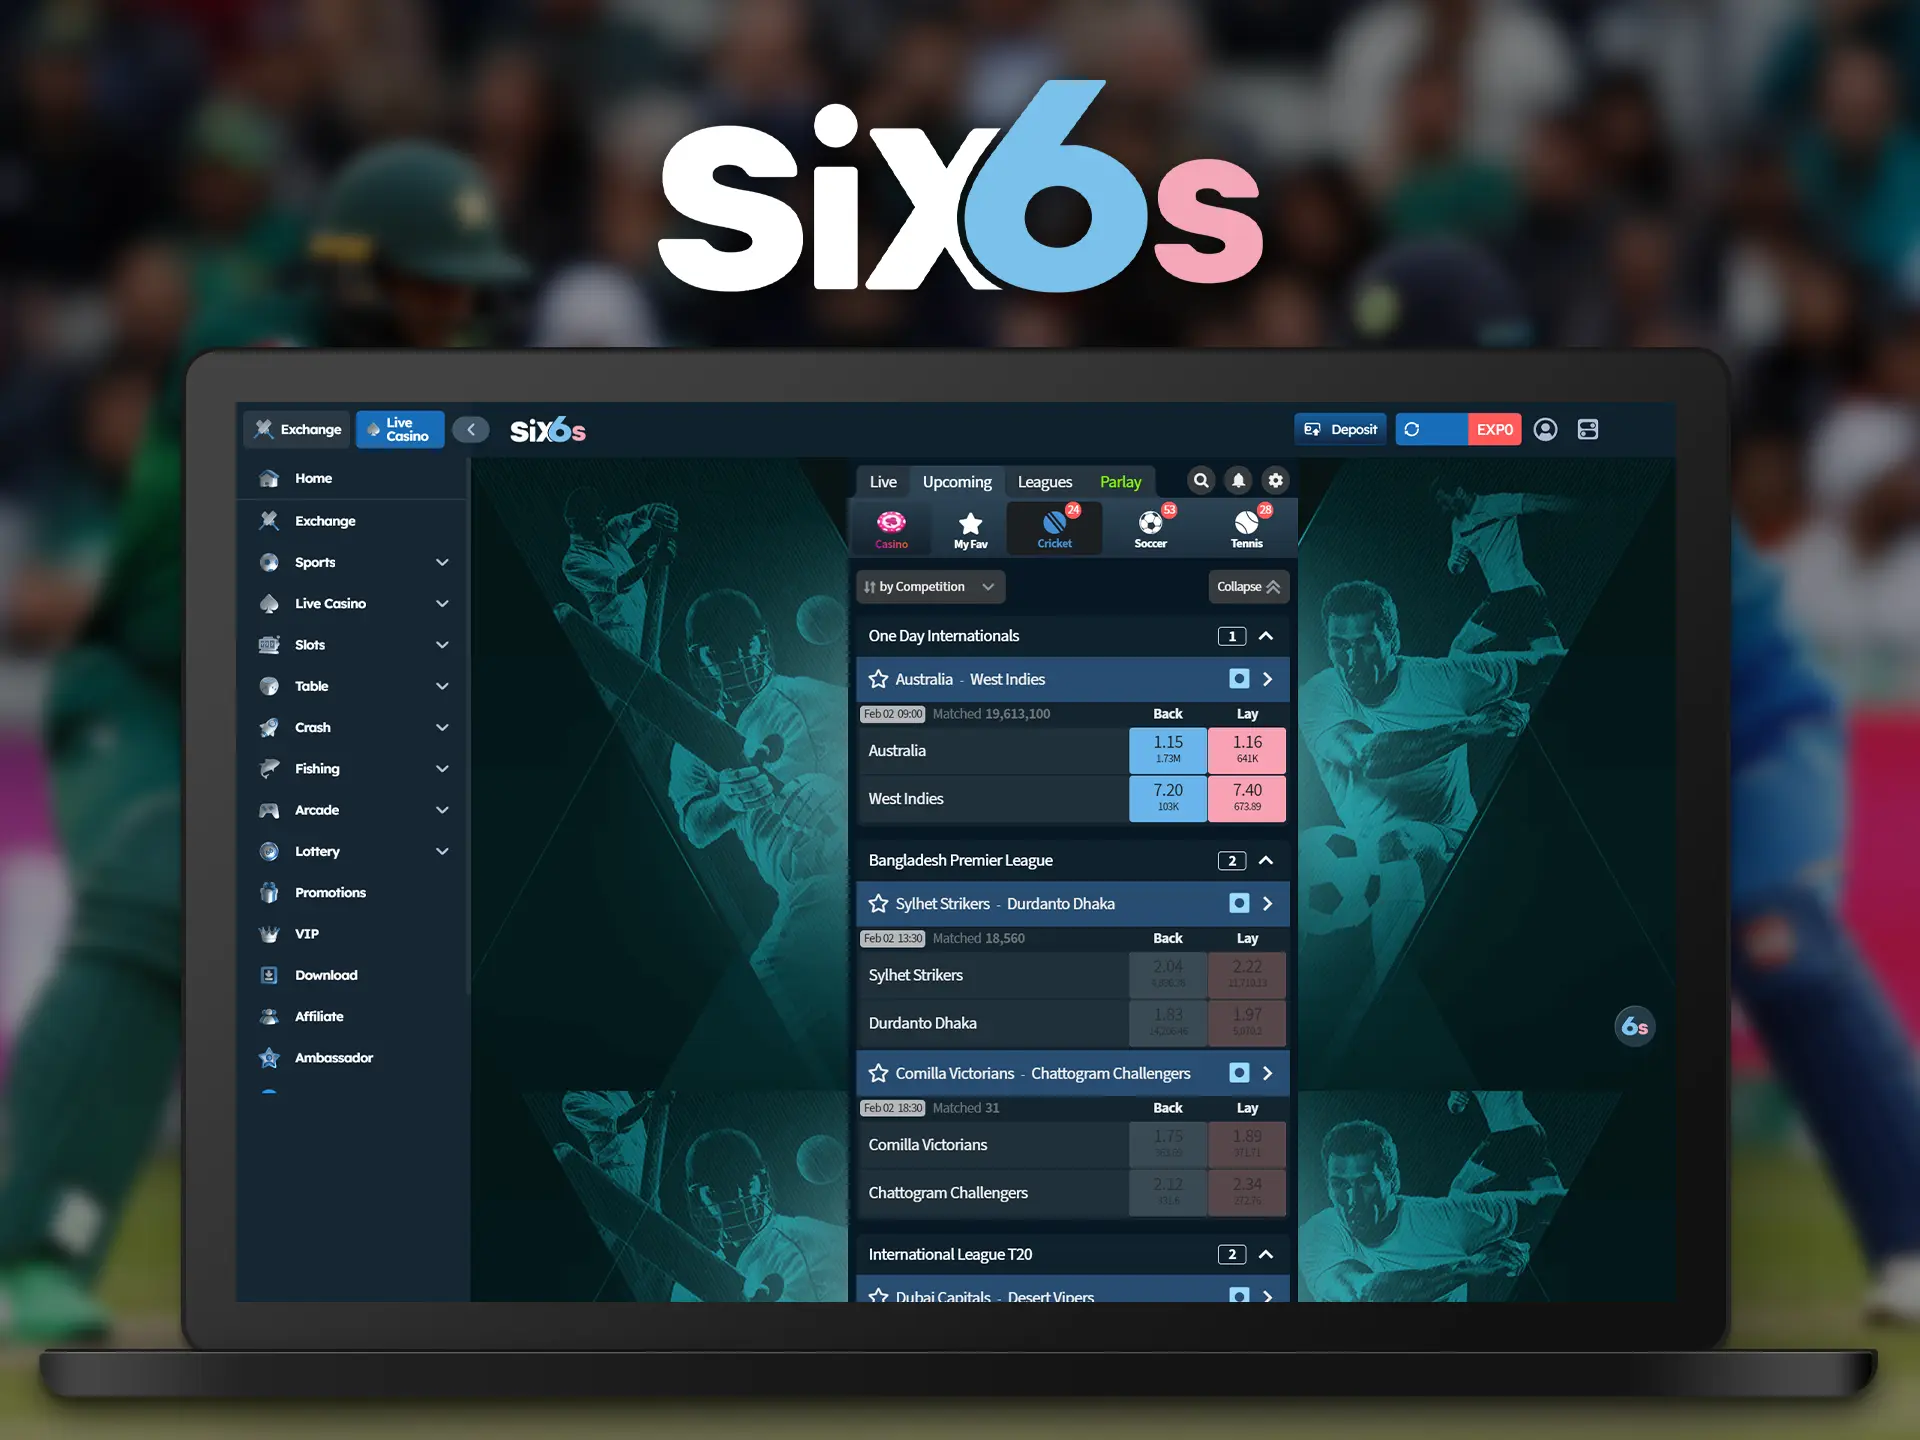 Six6s online gambling platform covers a wide range of sporting events.